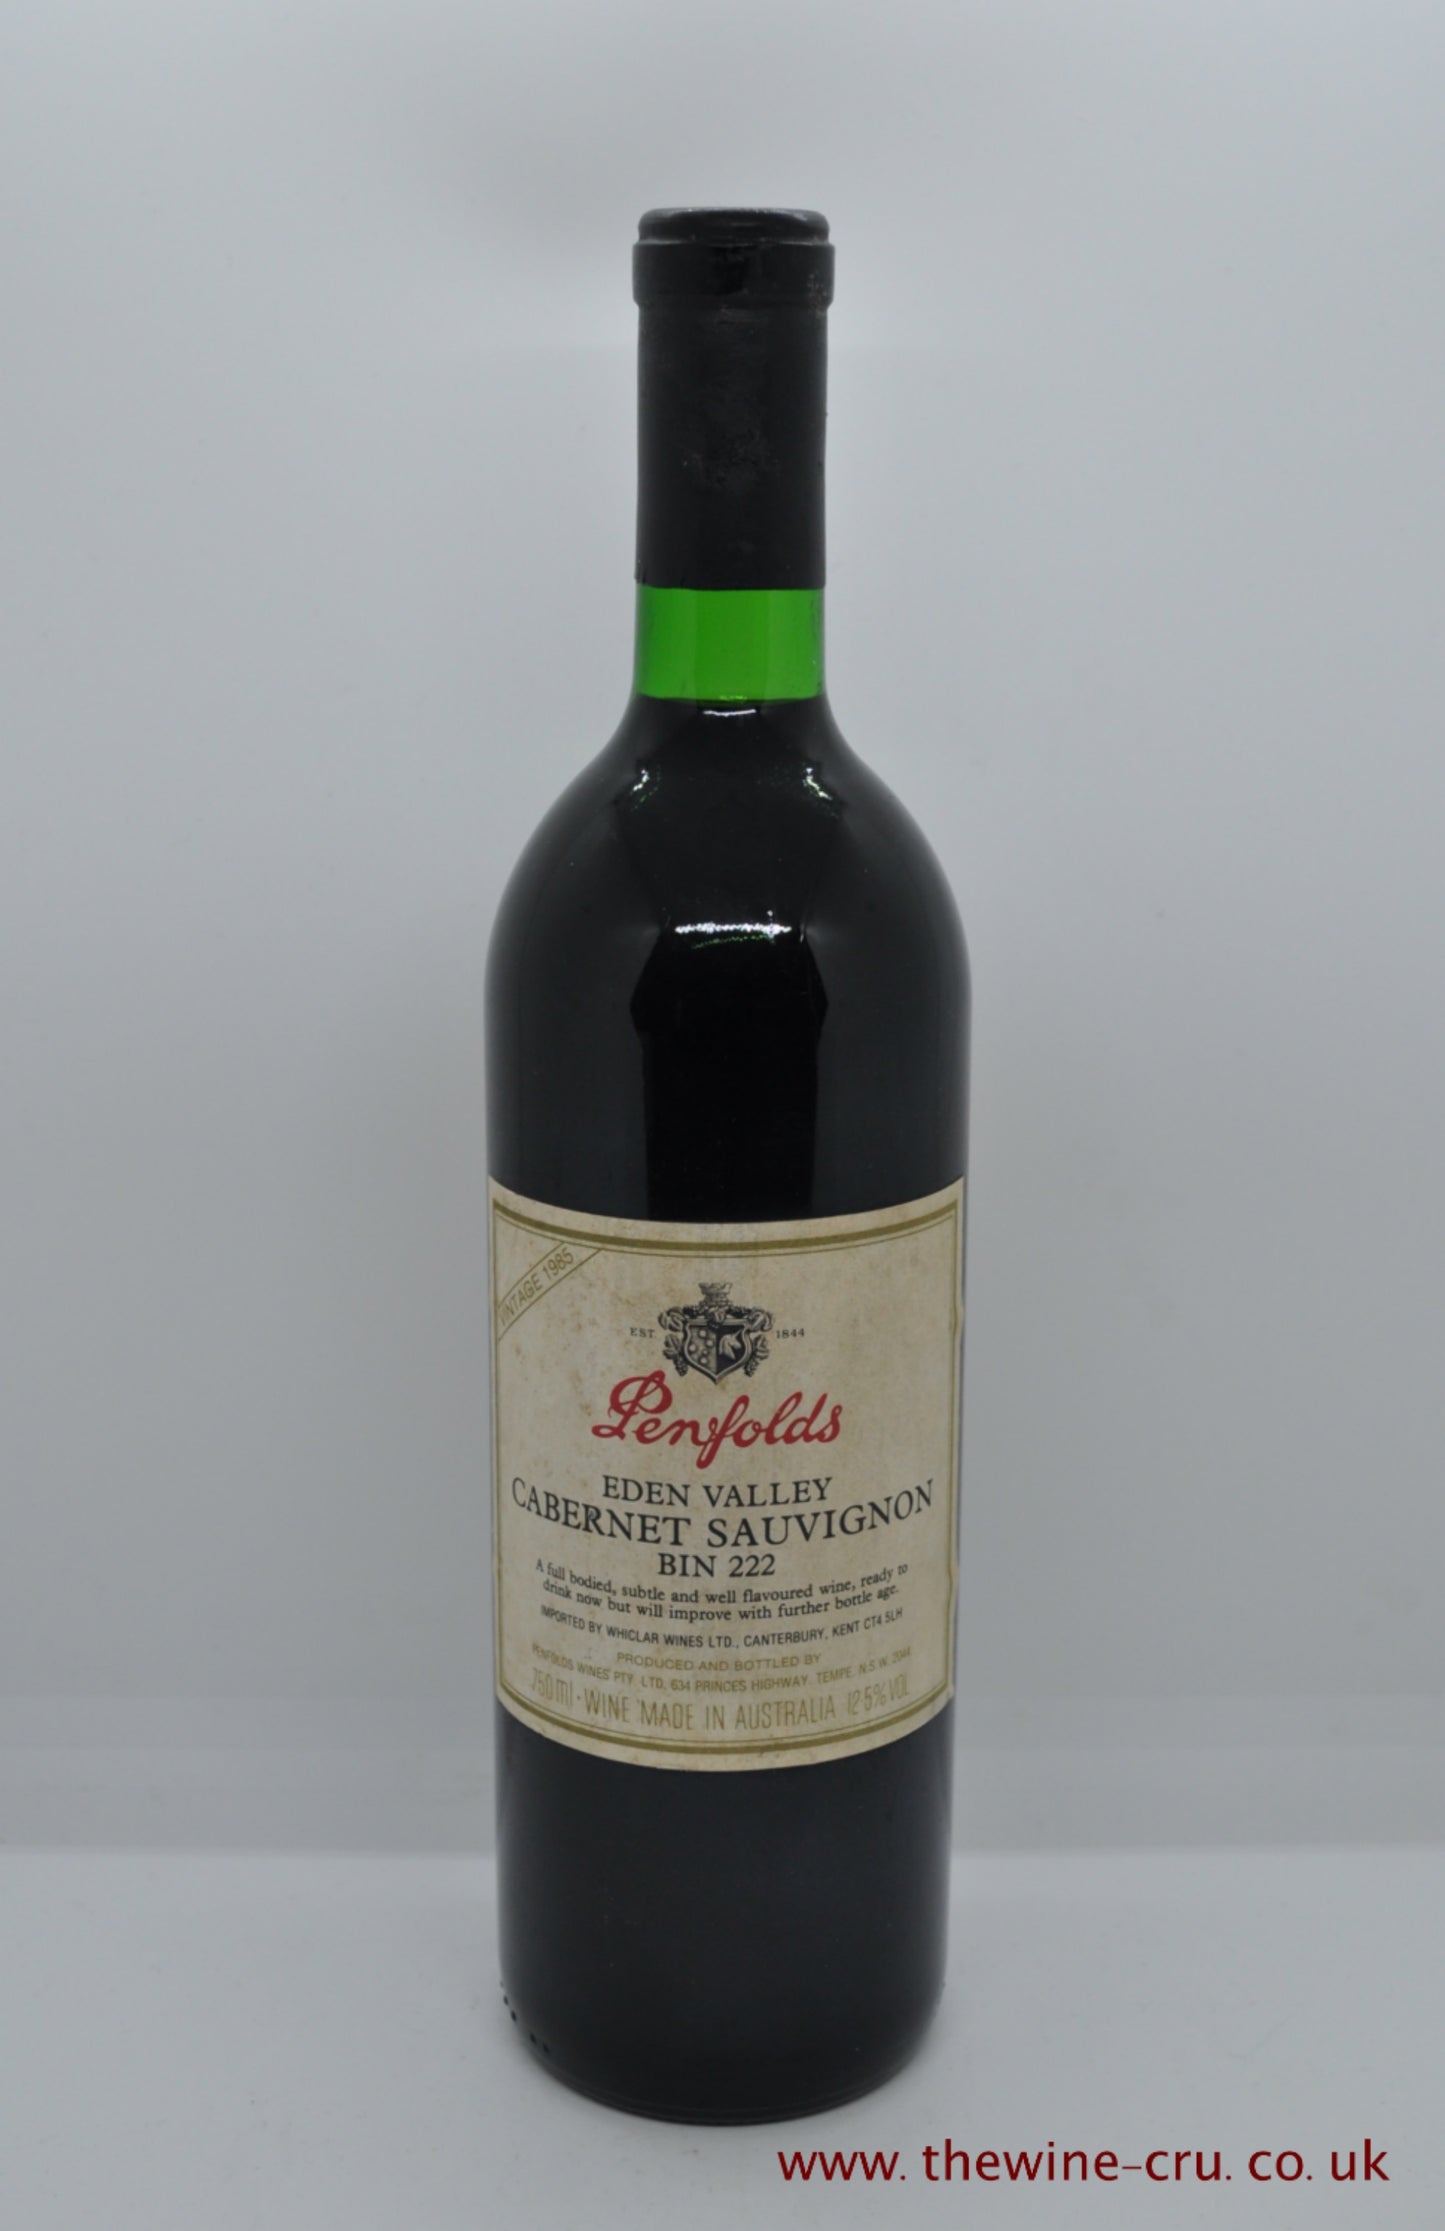 1985 vintage red wine. Penfolds Bin 222 Eden Valley Cabernet Sauvignon 1985. Australia. Immediate delivery. Free local delivery. Gift wrapping available.